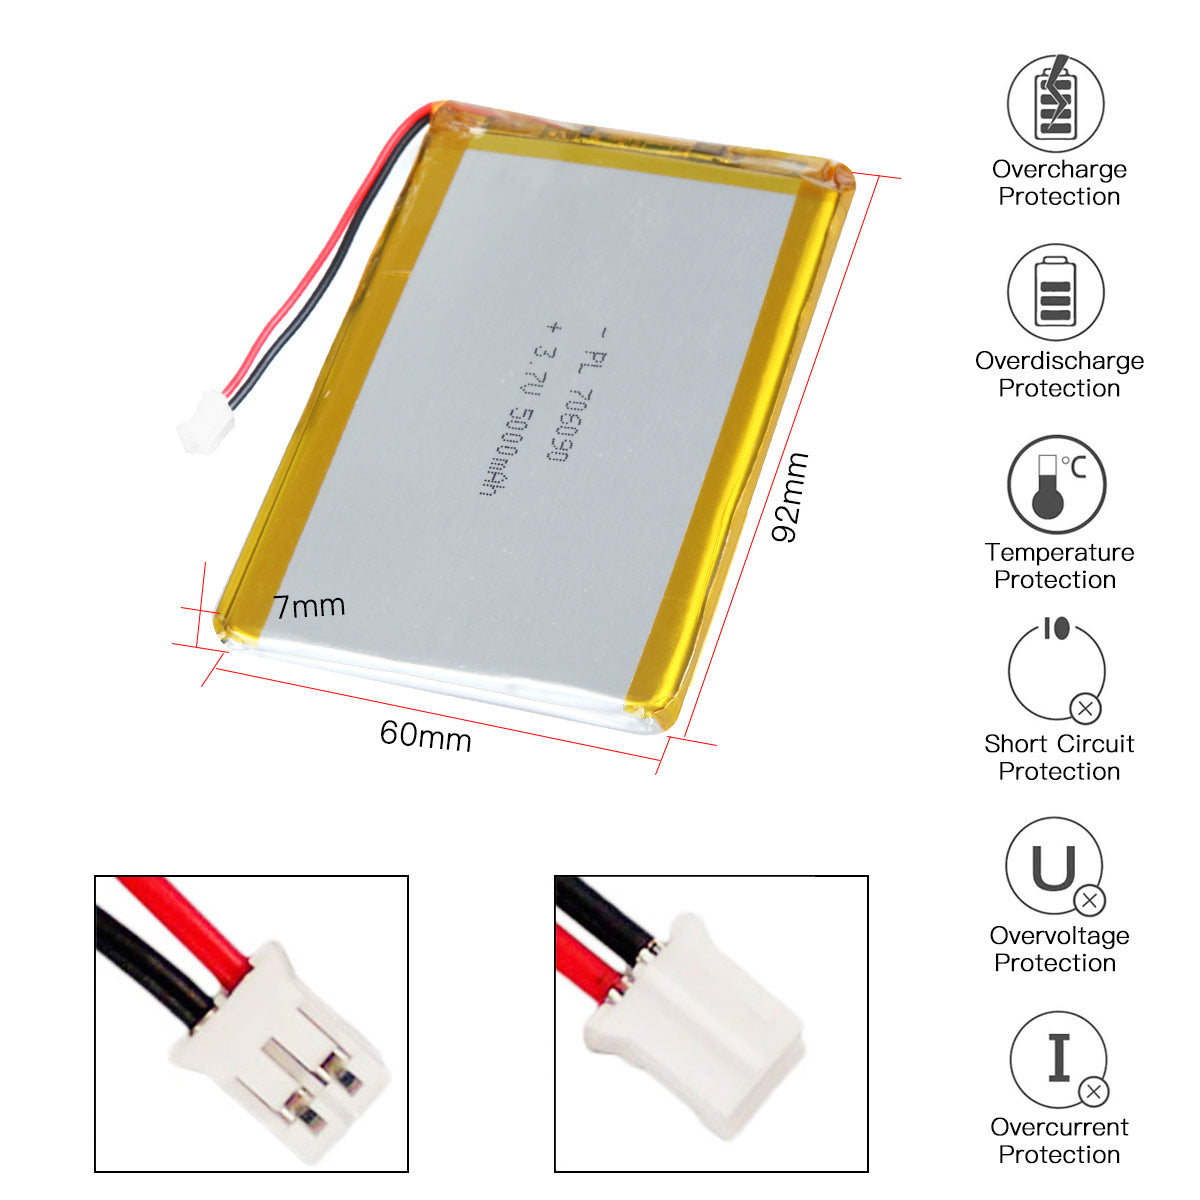 YDL 3.7V 5000mAh 706090 Rechargeable Lithium Polymer Battery Length 92mm